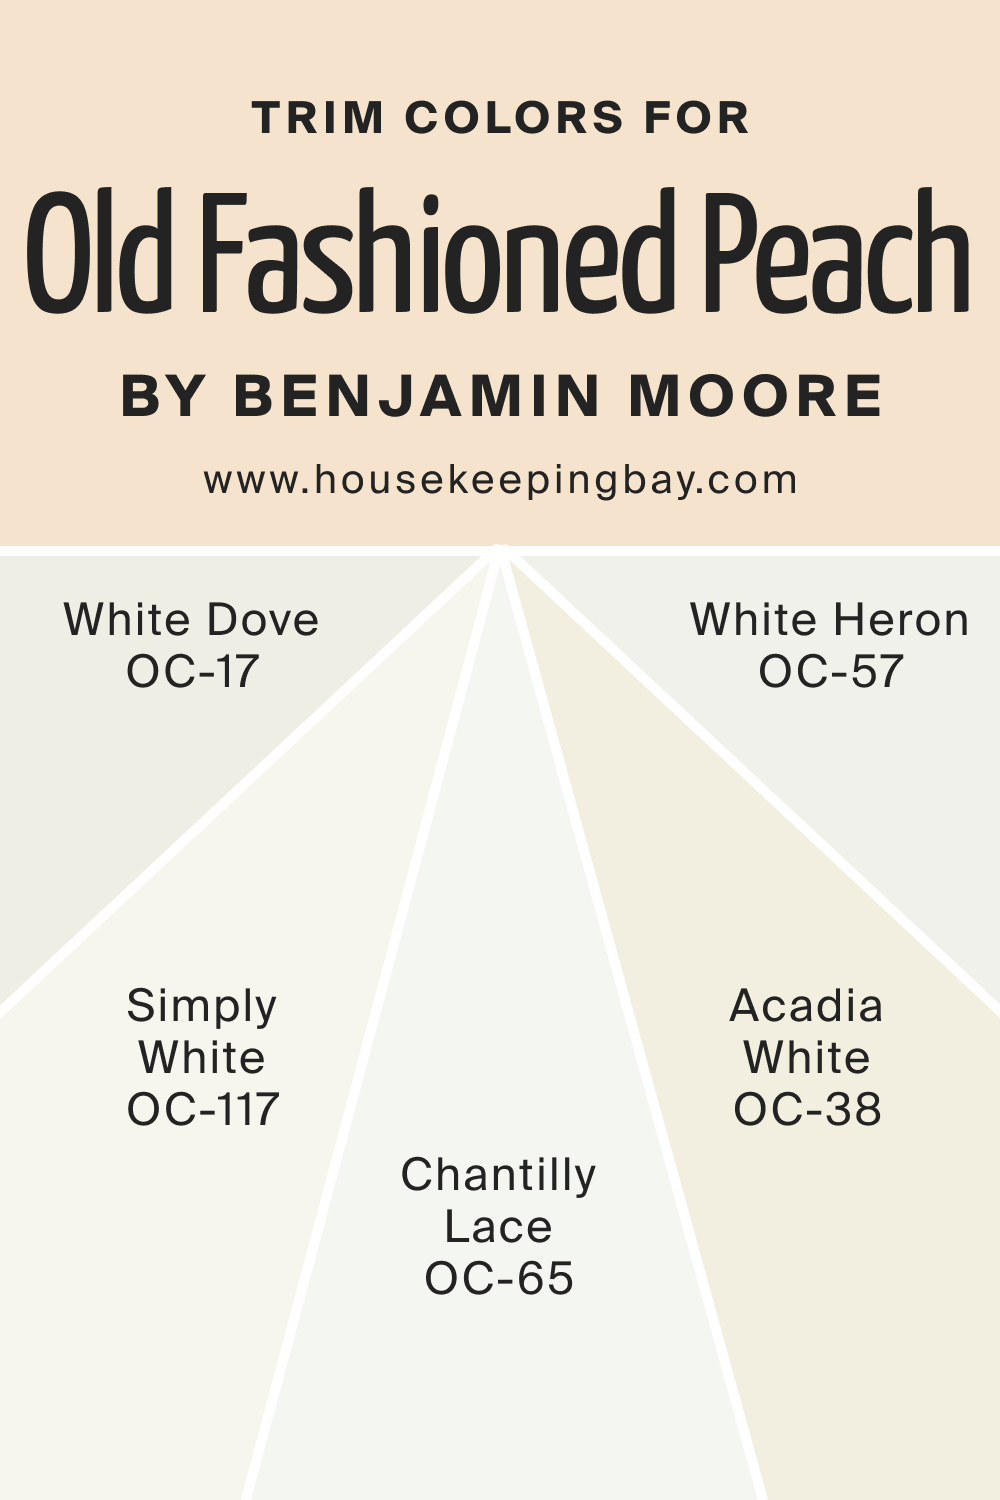 Trim Colors for Old Fashioned Peach OC 79 by Benjamin Moore